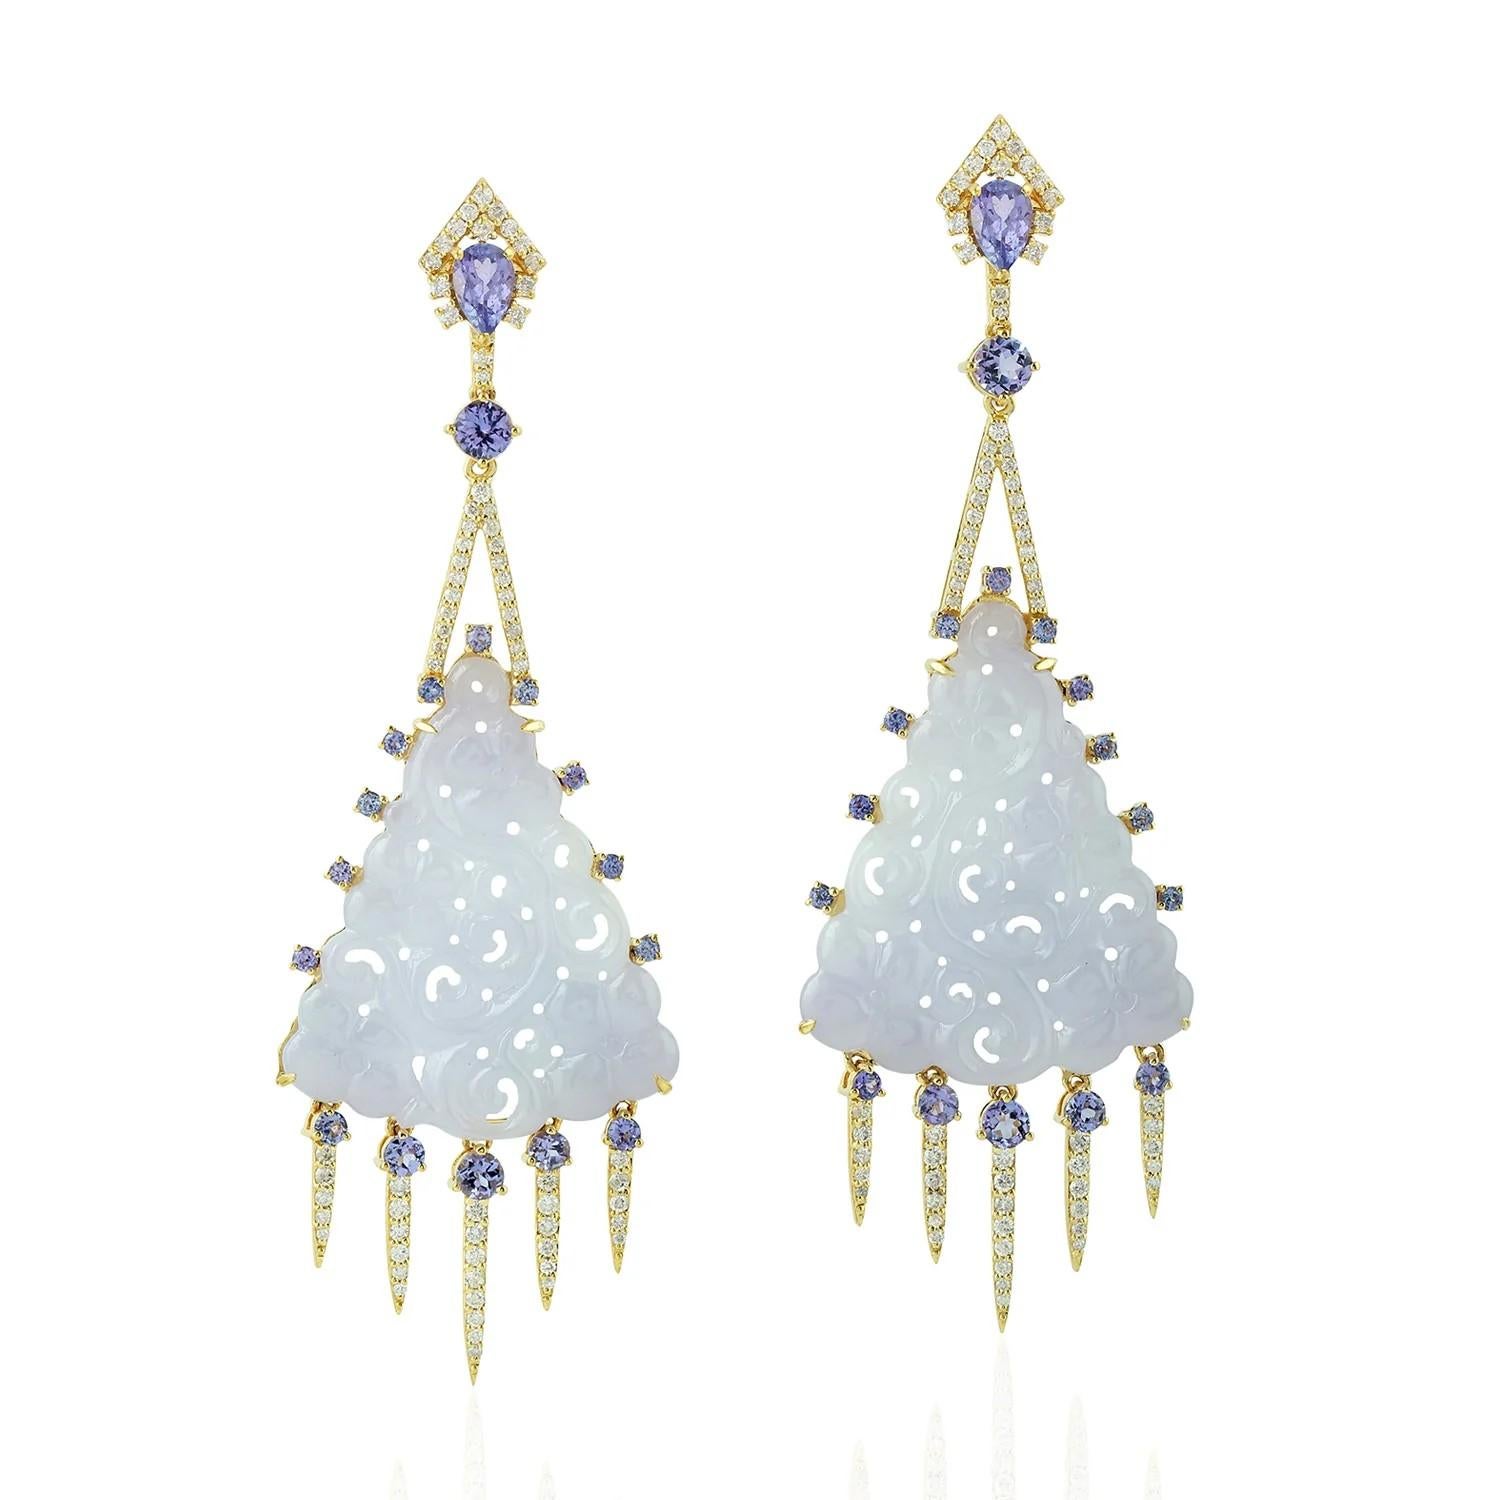 These stunning hand carved Jade earrings are crafted in 18-karat gold. It is set in 27.5 carats Jade, 2.89 carats Tanzanite and .95 carats of sparkling diamonds.

FOLLOW  MEGHNA JEWELS storefront to view the latest collection & exclusive pieces. 